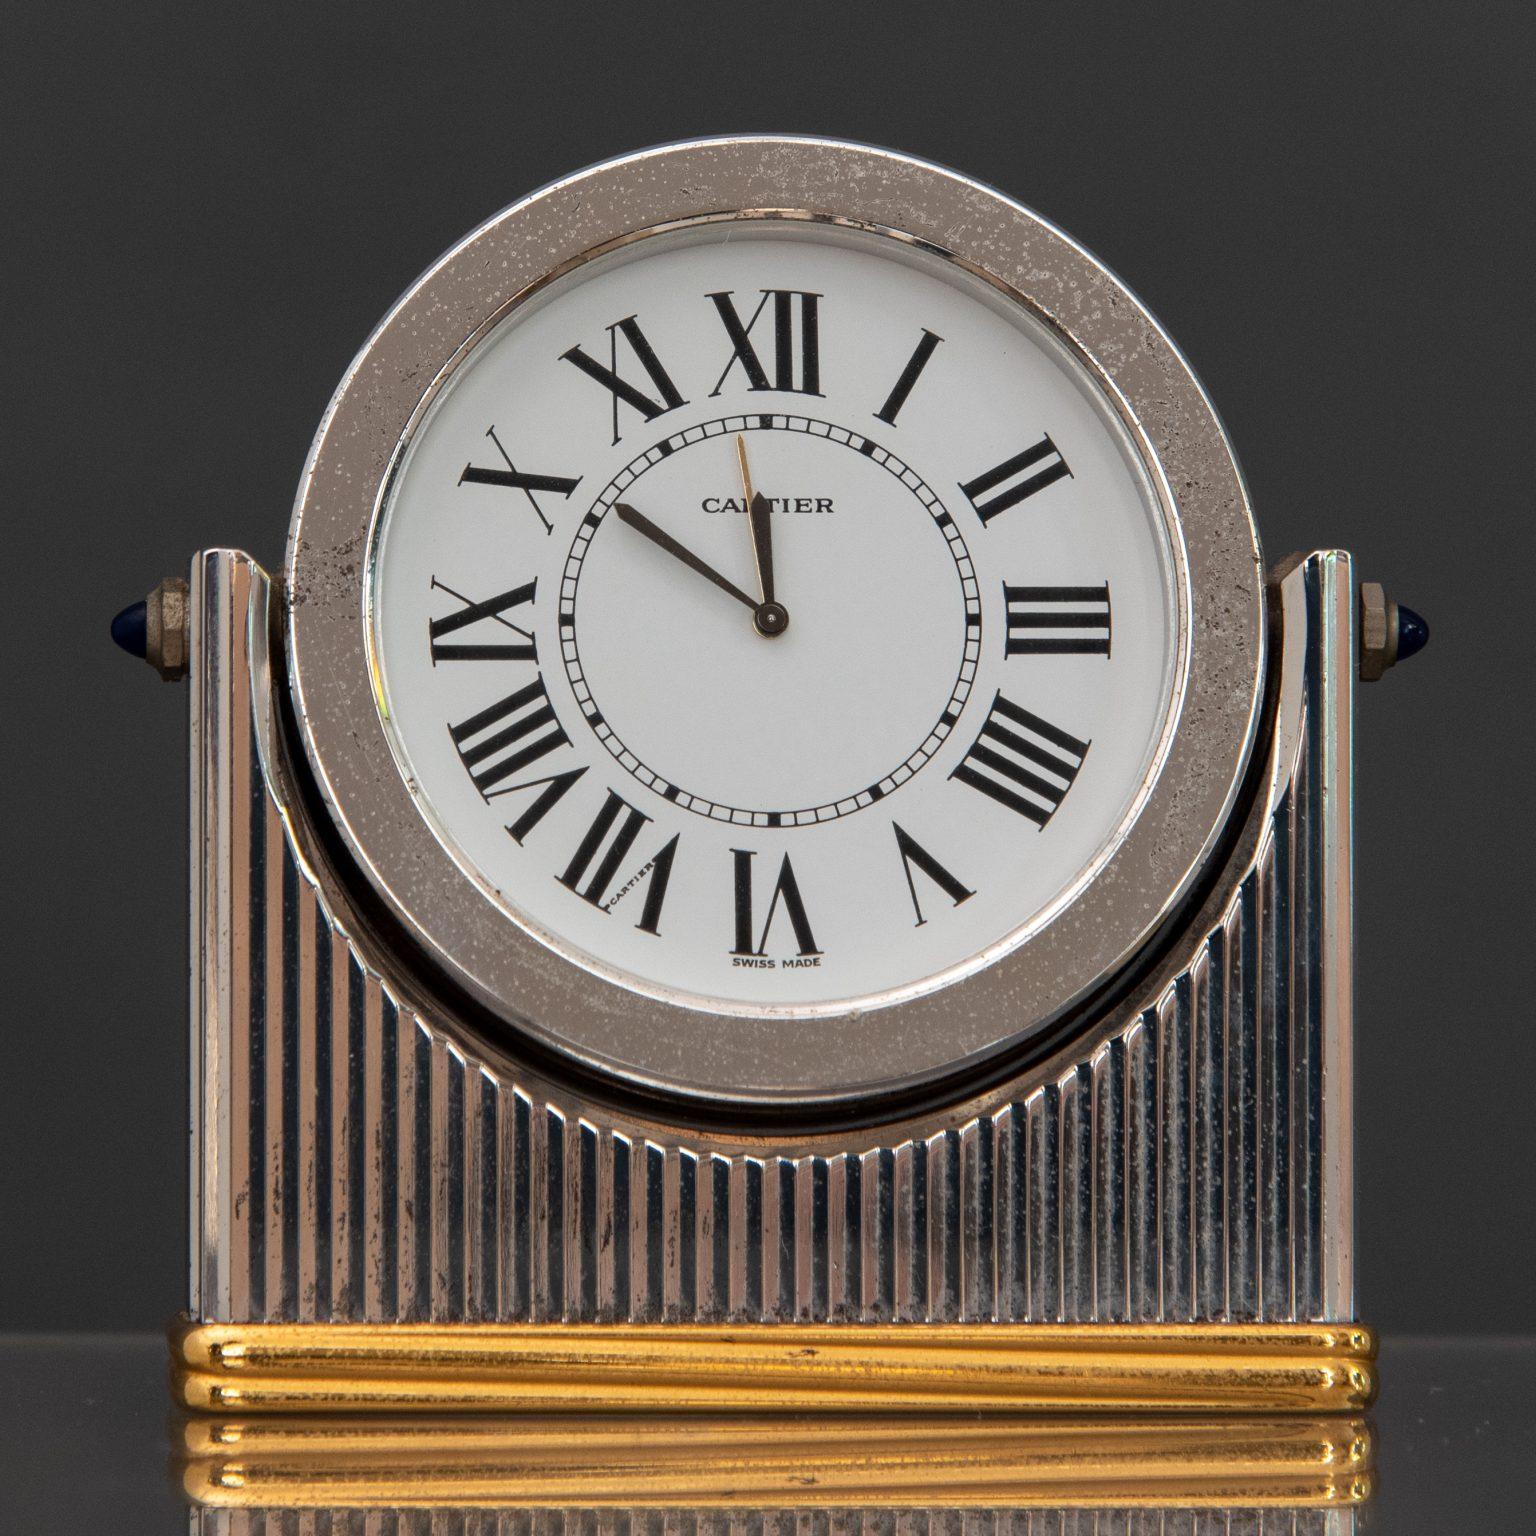 Table alarm clock, steel and brass tilting frame, white dial with Roman hour markers, quartz movement and two cabochon sapphires on the sides.

Cartier Must de Cartier Swiss Made

Serial number 901602199.